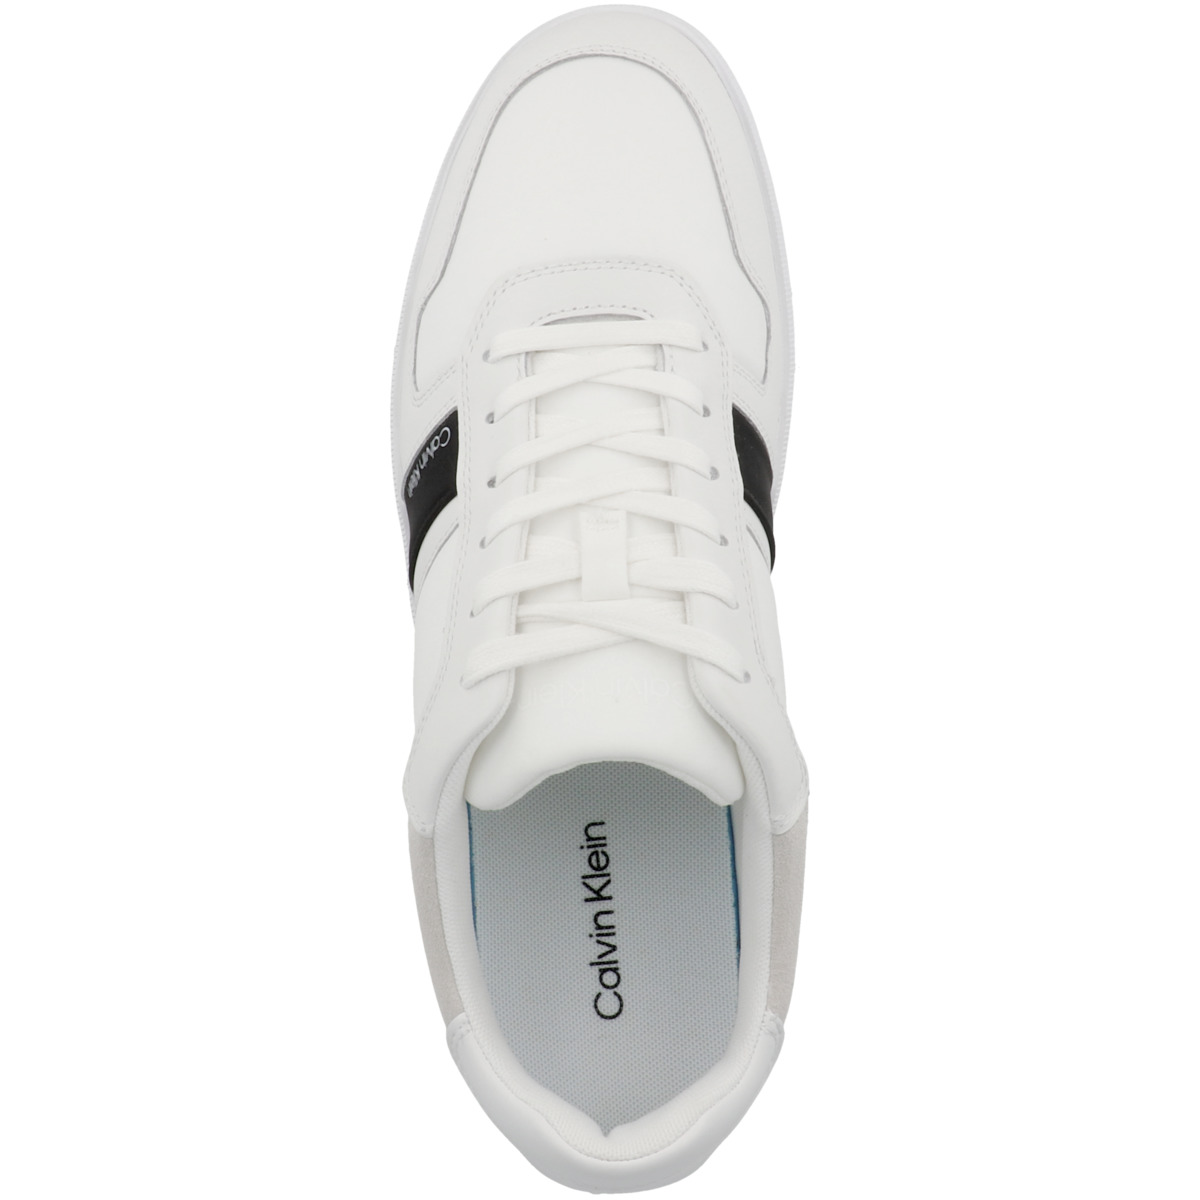 Calvin Klein Low Top Lace Up Mix Sneaker low